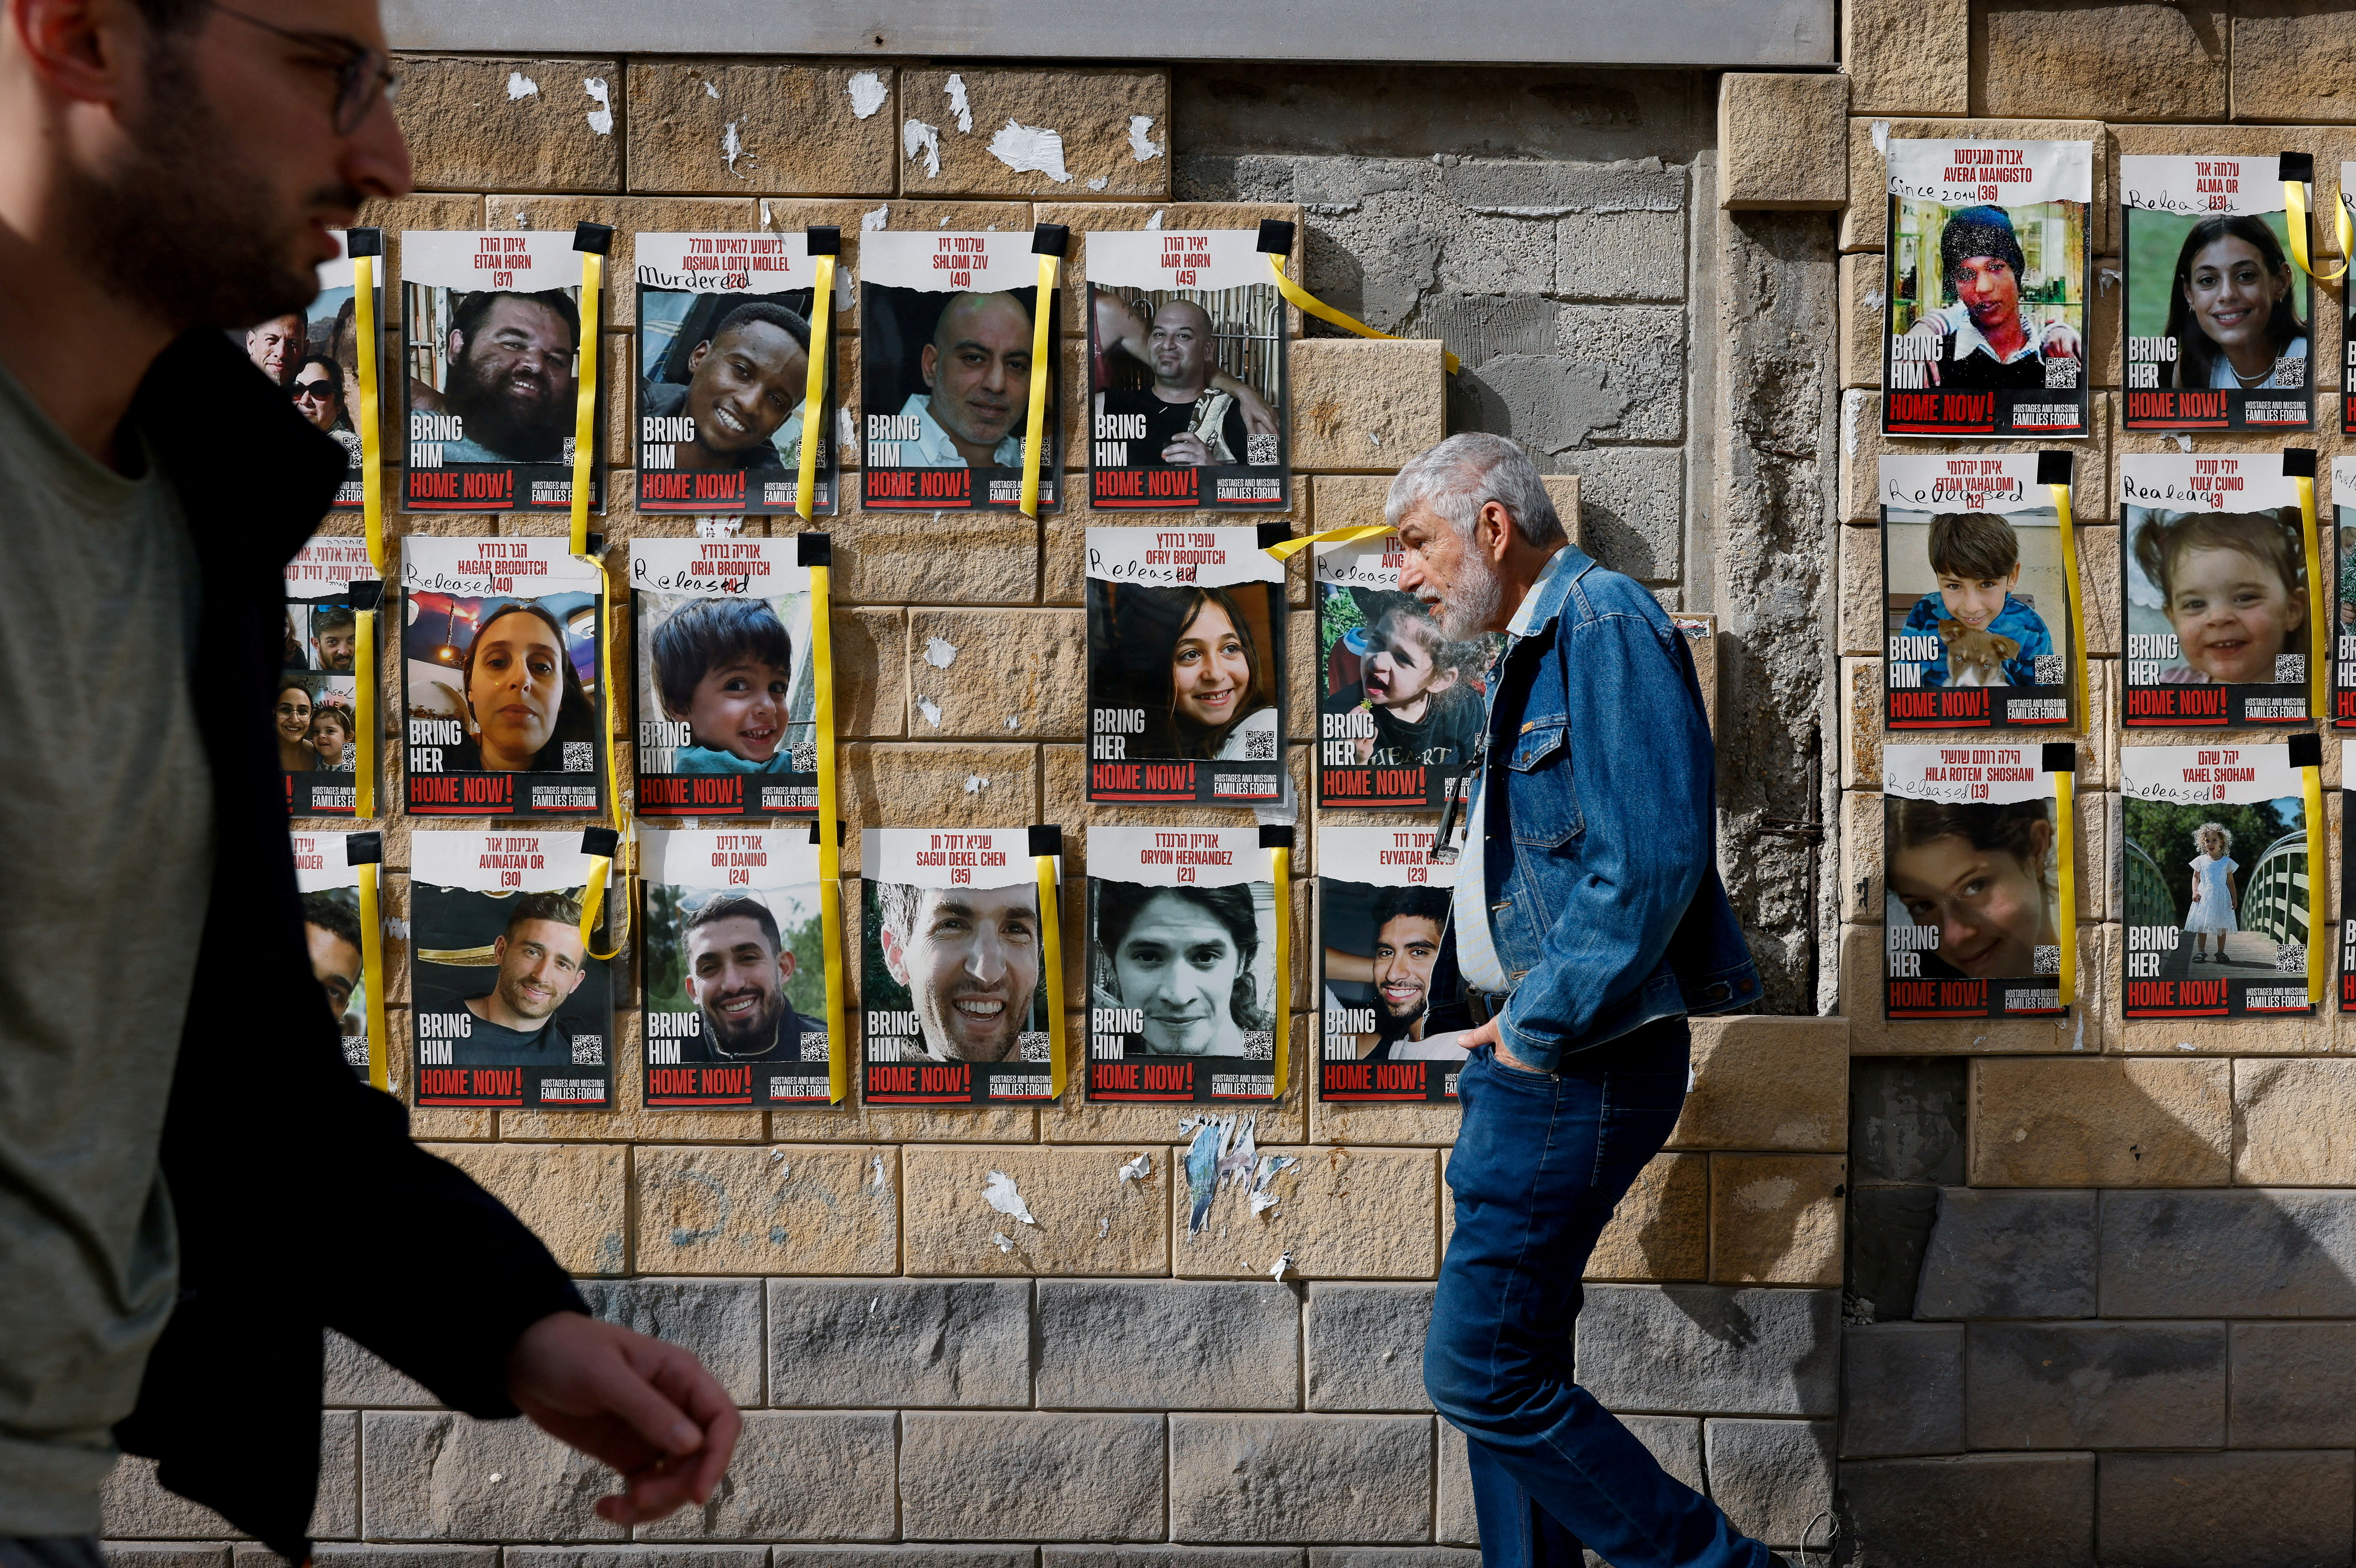 People walk past posters with photos of hostages, in Tel Aviv